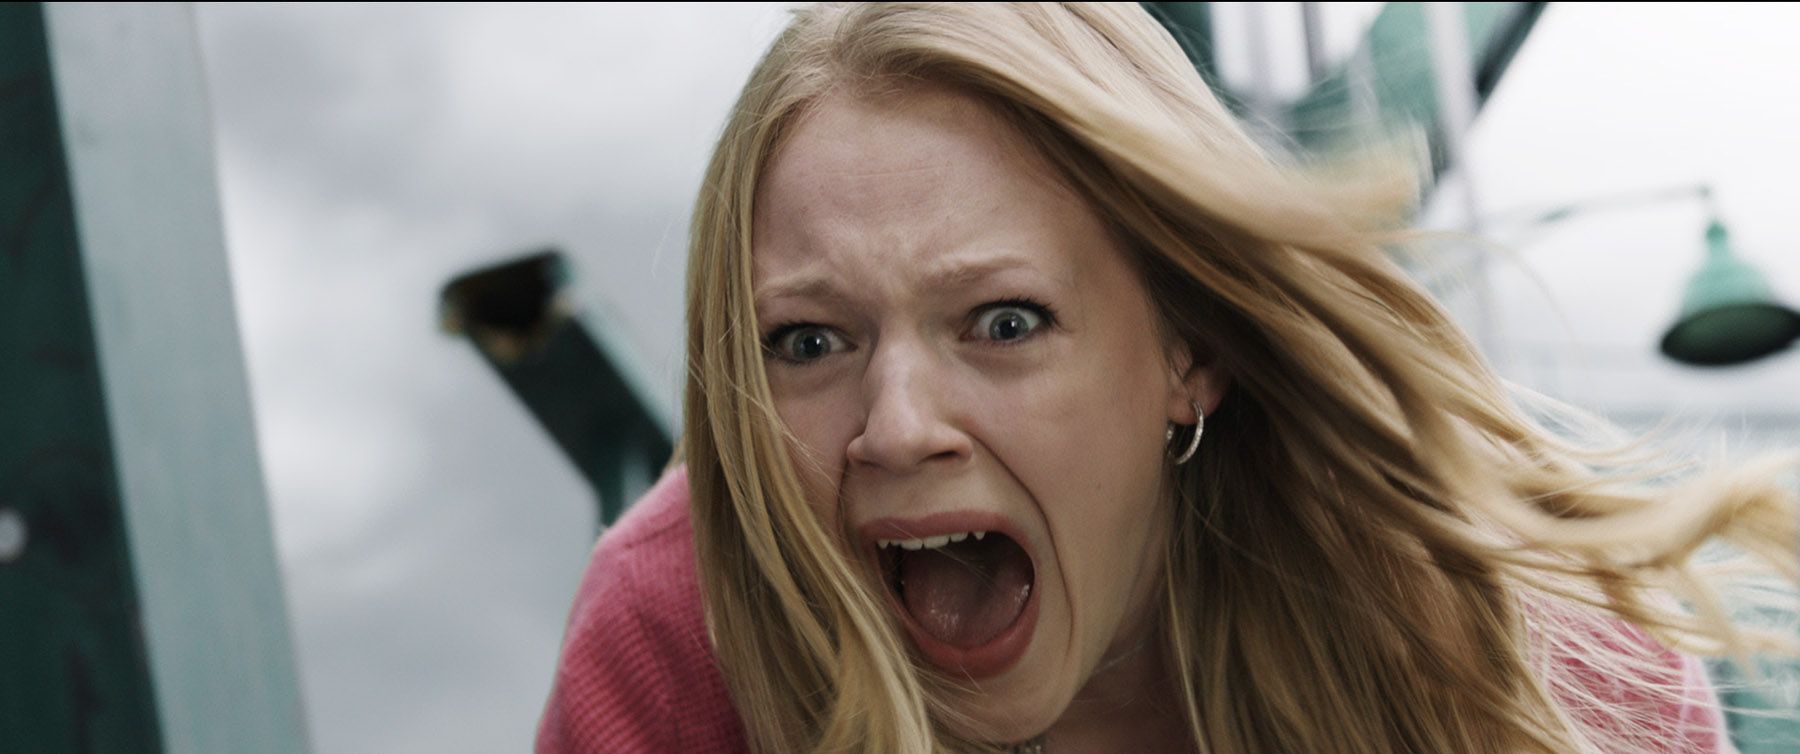 Emma Bell as Molly in Final Destination 5'It's also good to approach it as if it's the first time and it's never happened to my character before, added {42}. Although there are other movies, this sort of thing has never happened to my character or me in my life. So approaching it from a point of view where it's absolutely new and happening for the first time kind of keeps it fresh in that way, without any preconceived notions of what should happen. It's cool for us too because the characters in 